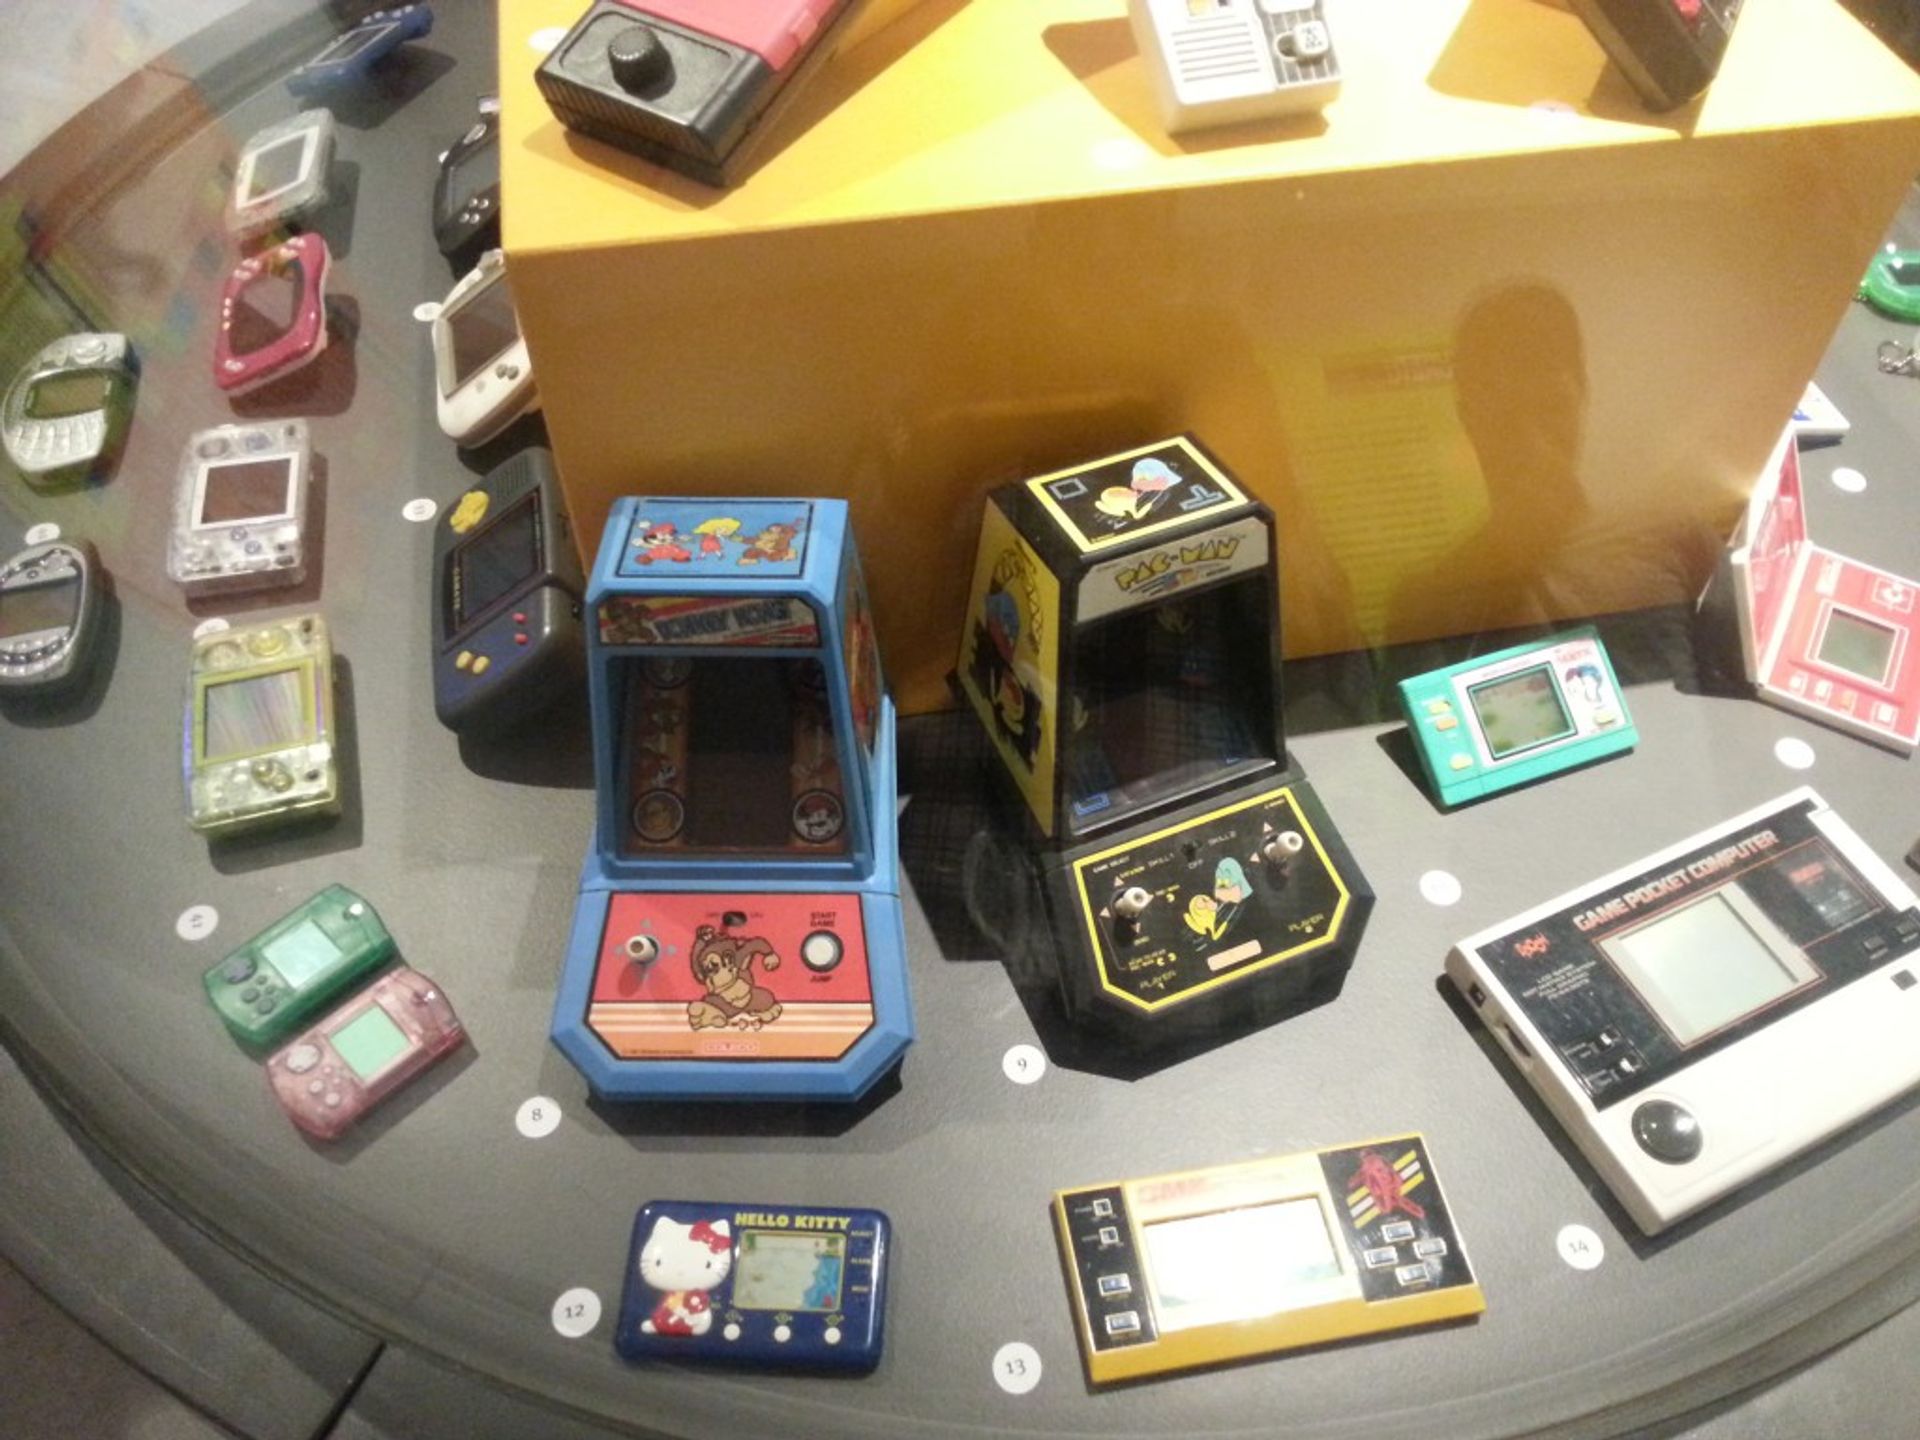 Awww... Look at the itty-bitty handhelds :3